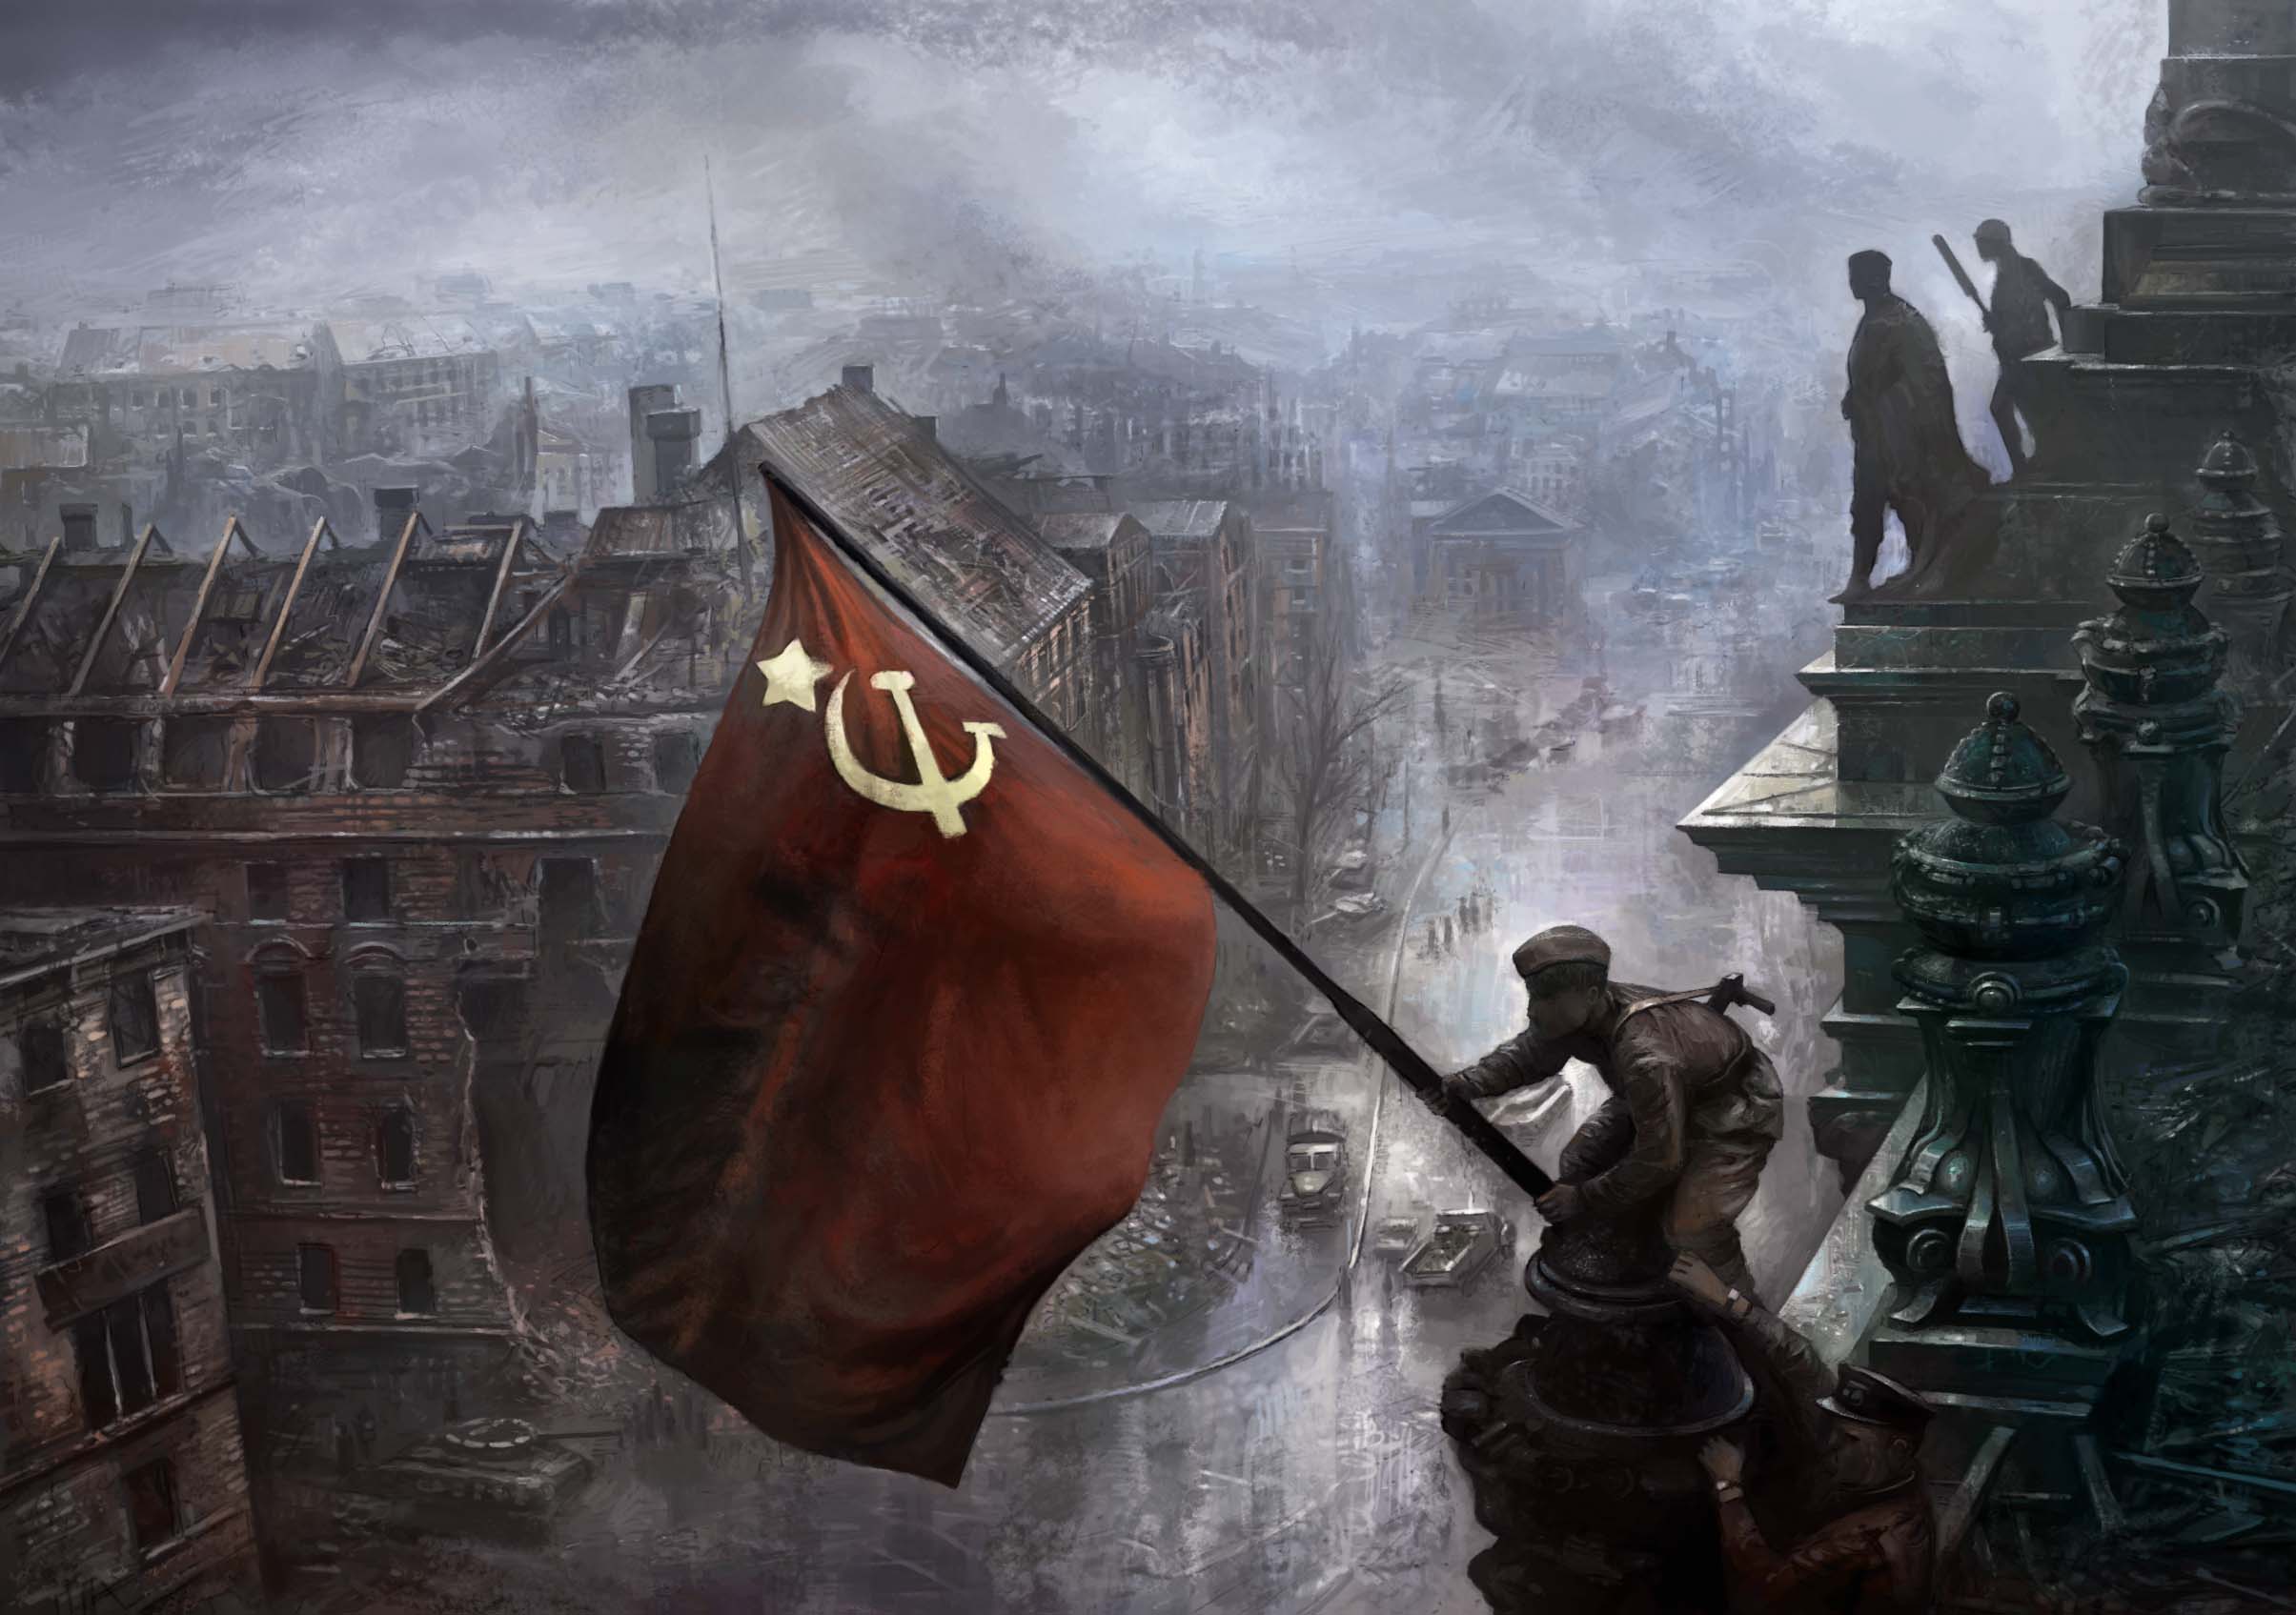 USSR flag waving in front of the Reichstag during World War II.